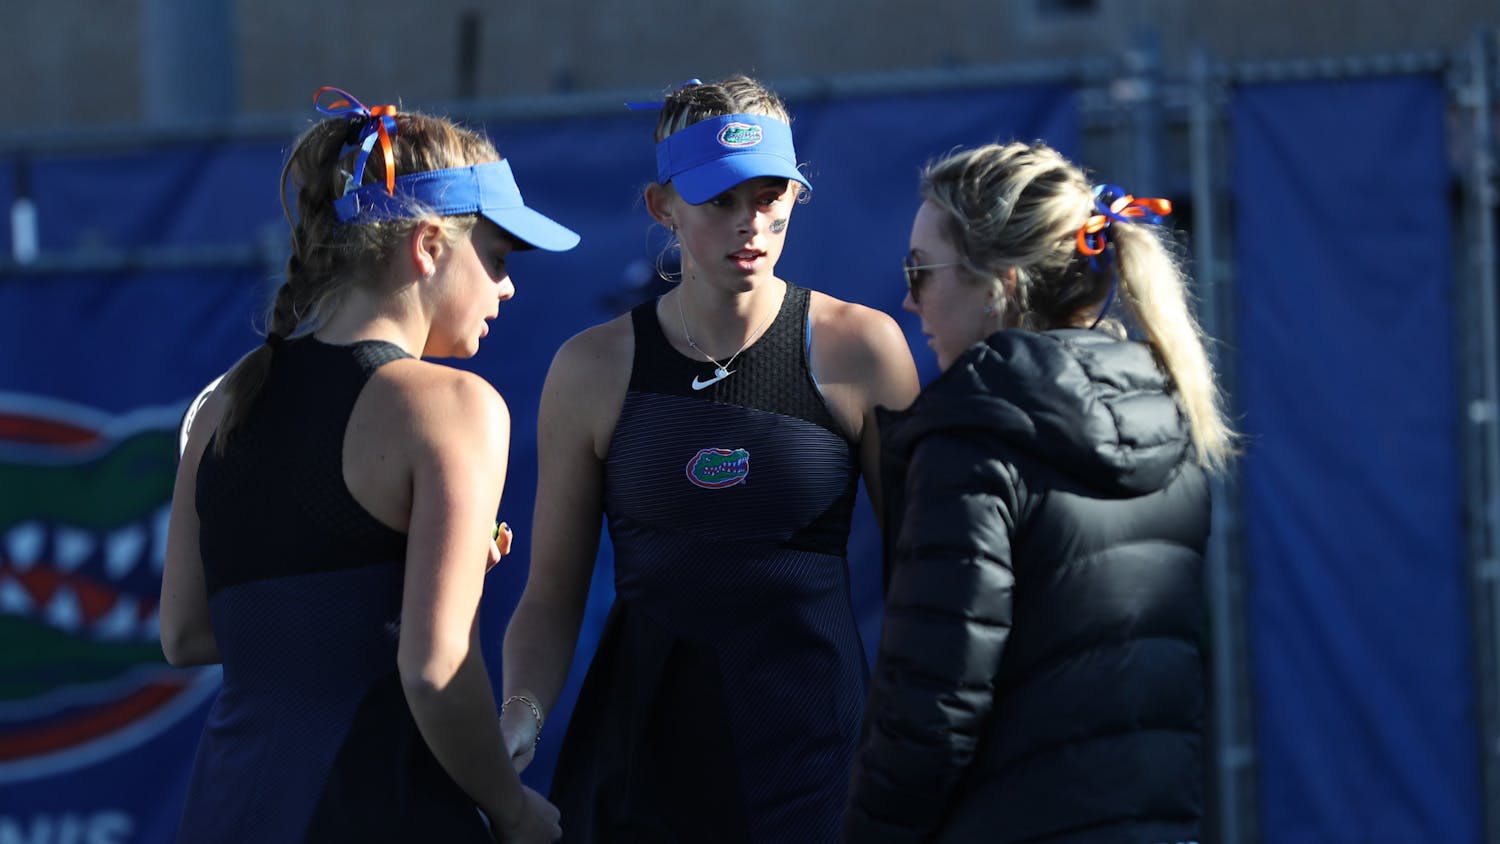 UF assistant coach Lauren Embree talks to Bente Spee and Alicia Dudeney during the Gators&#x27; match against the Ospreys on Sunday, January 23, 2022 at Linder Stadium at Ring Tennis Complex in Gainesville, FL / UAA Communications photo by Anna Carrington